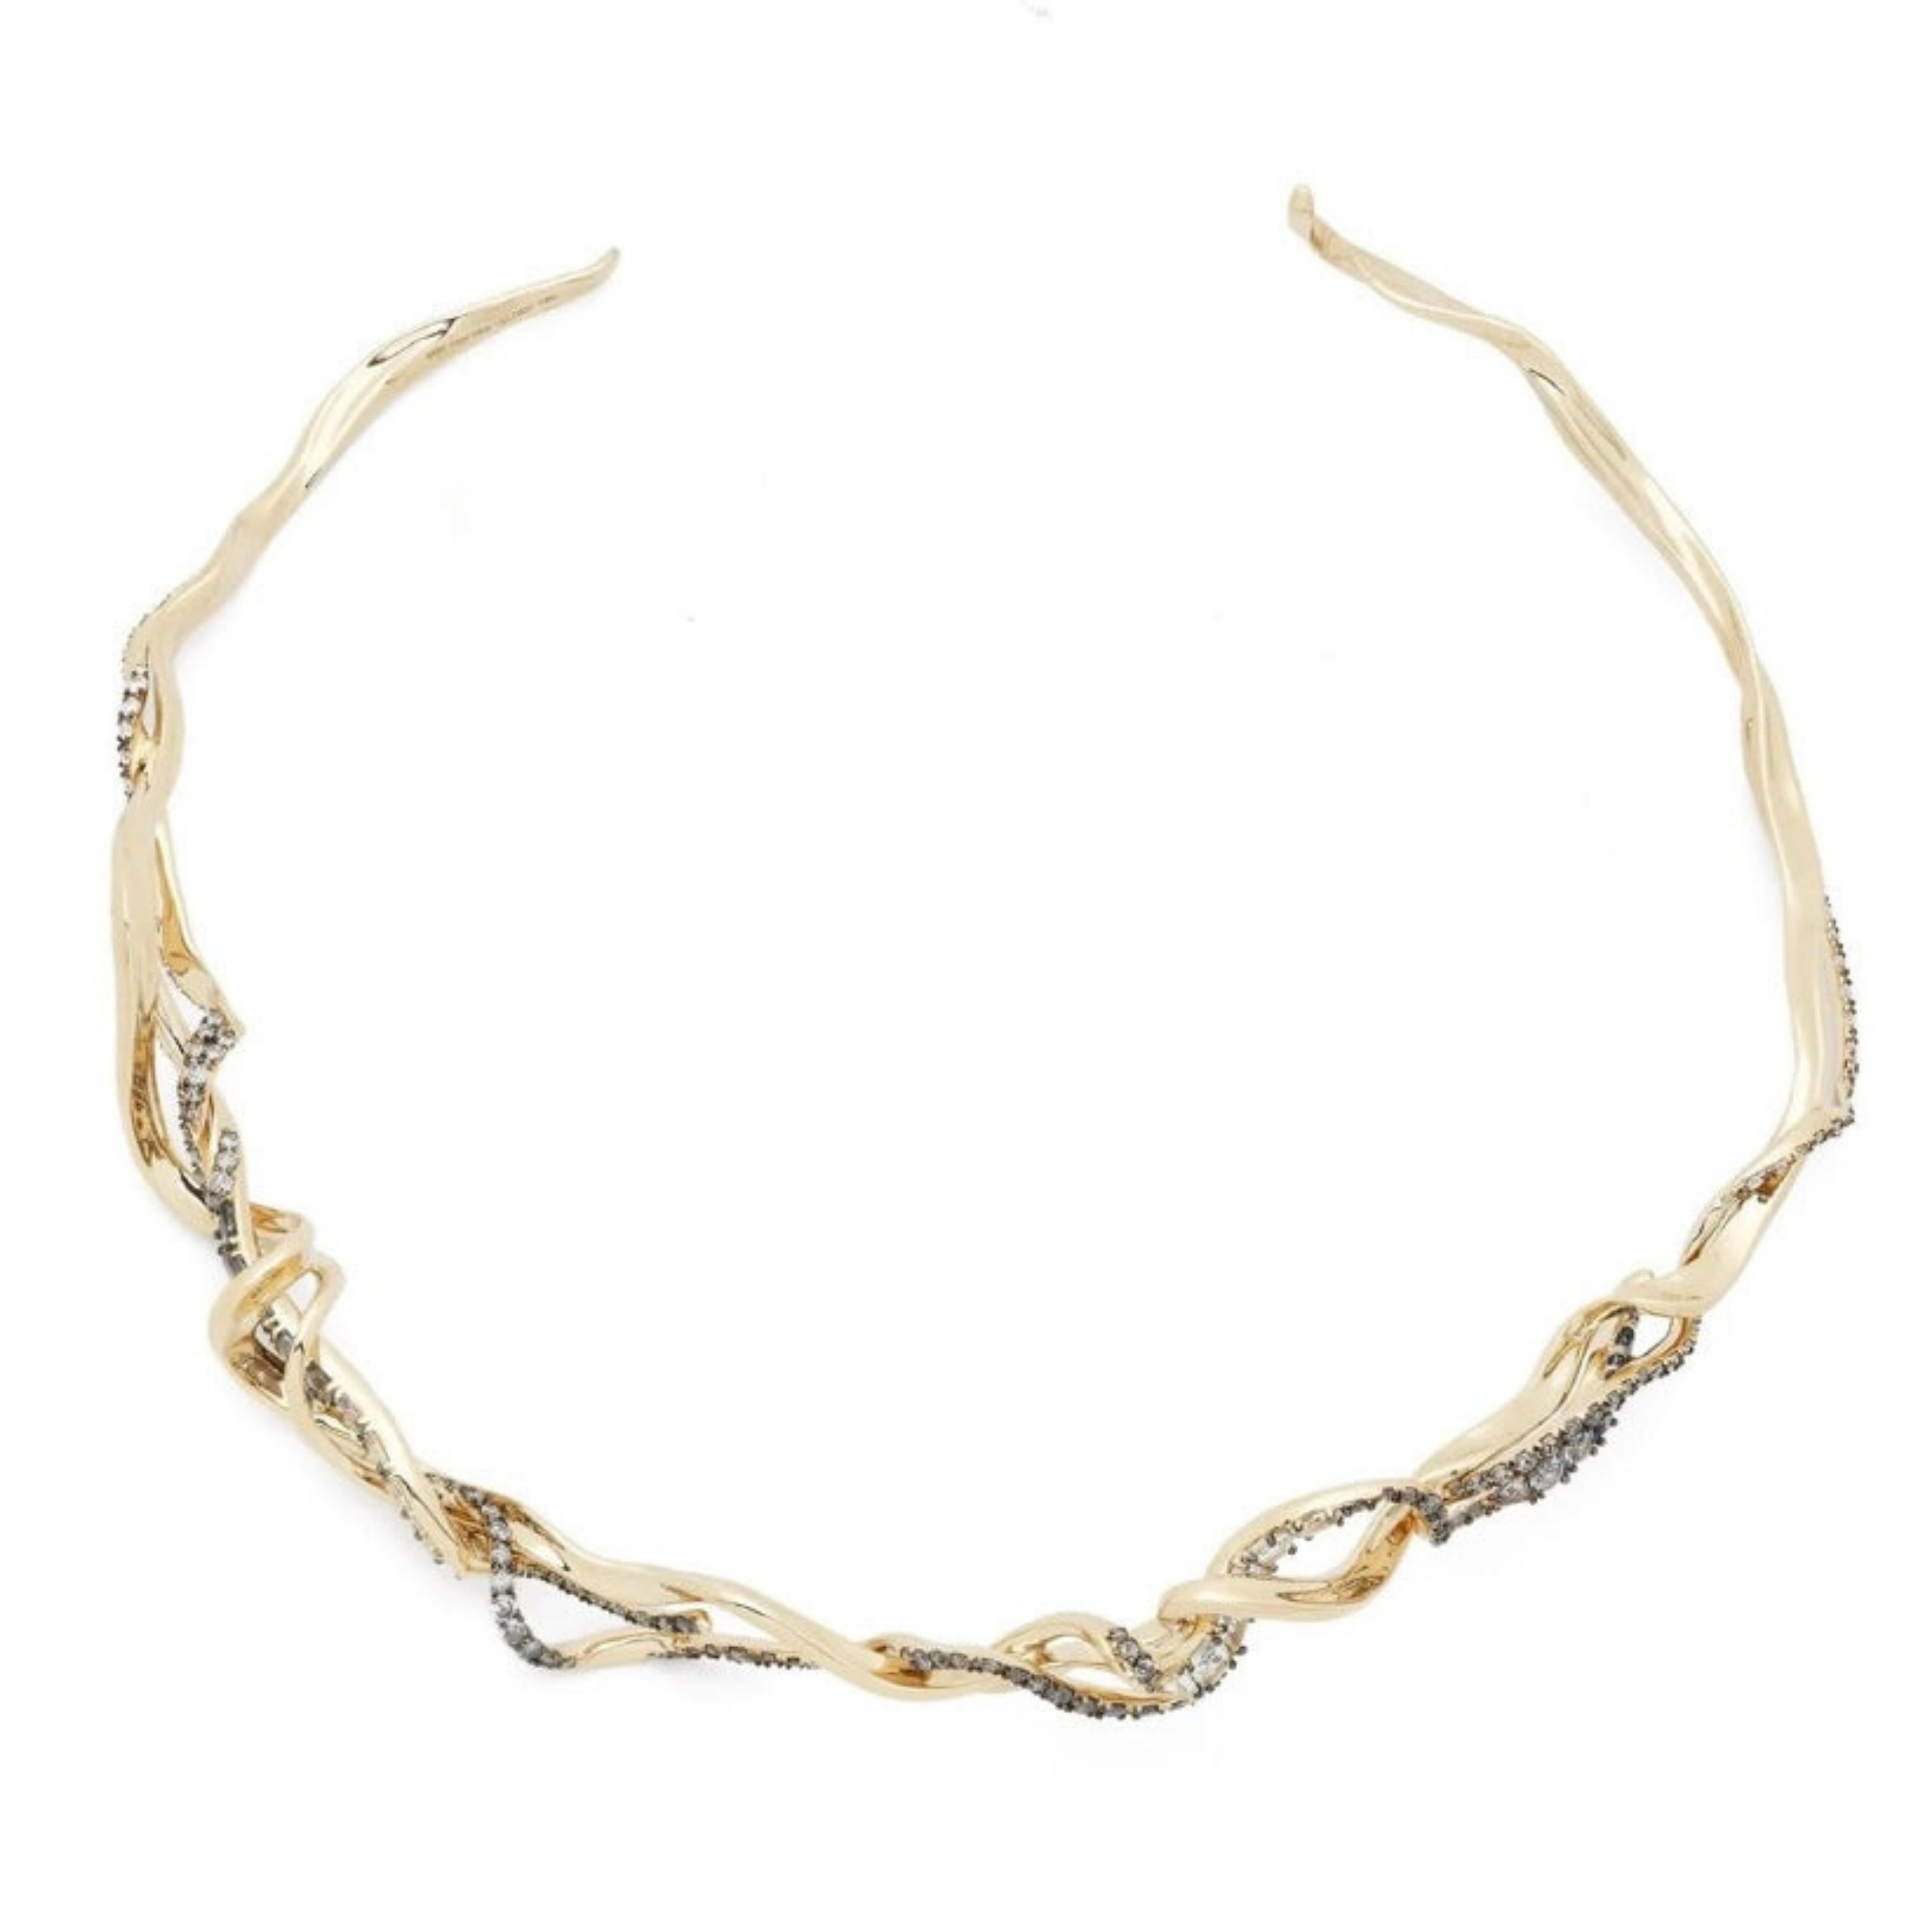 Bibi van der Velden Diamond Smoke Fume Choker. Fitted sold 18K gold choker style necklace with intertwining white diamonds, grey diamonds and spinels. Product photo shown from the top.